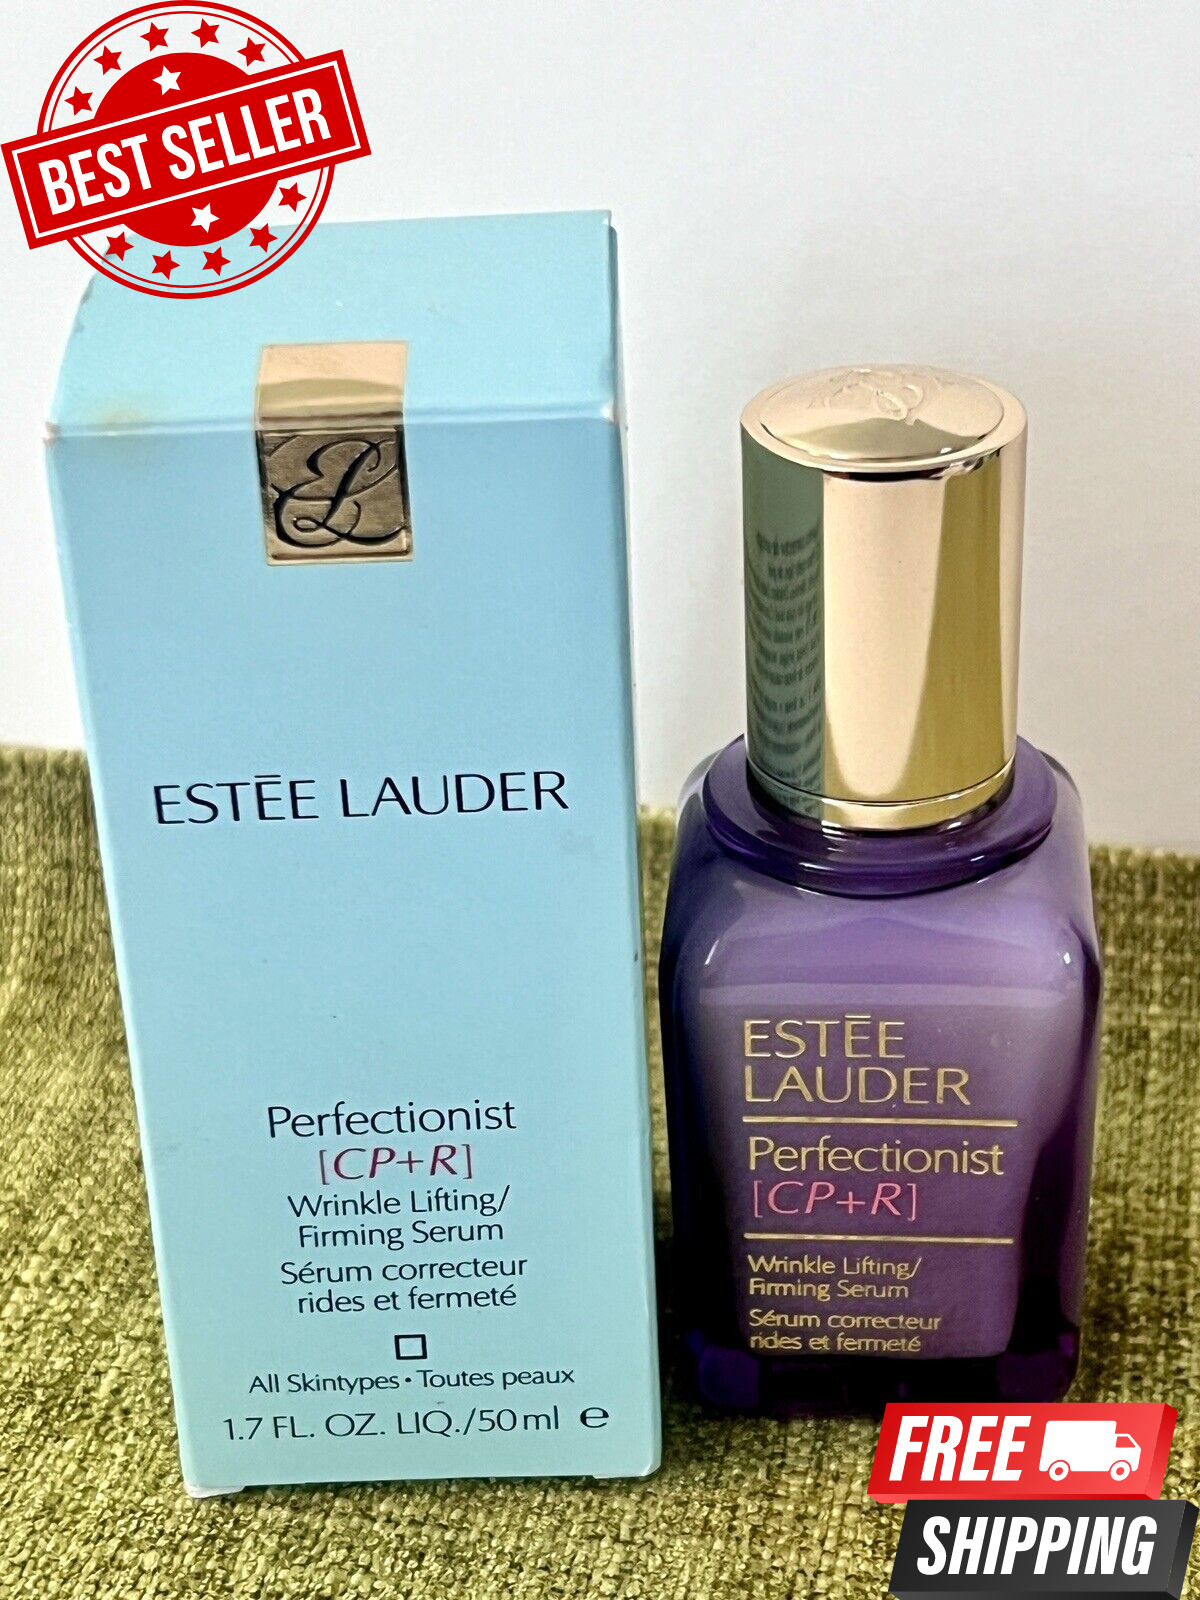 Estee Lauder Perfectionist CP+R Wrinkle Lifting Firming Serum Seal 1.7oz / 50ml.